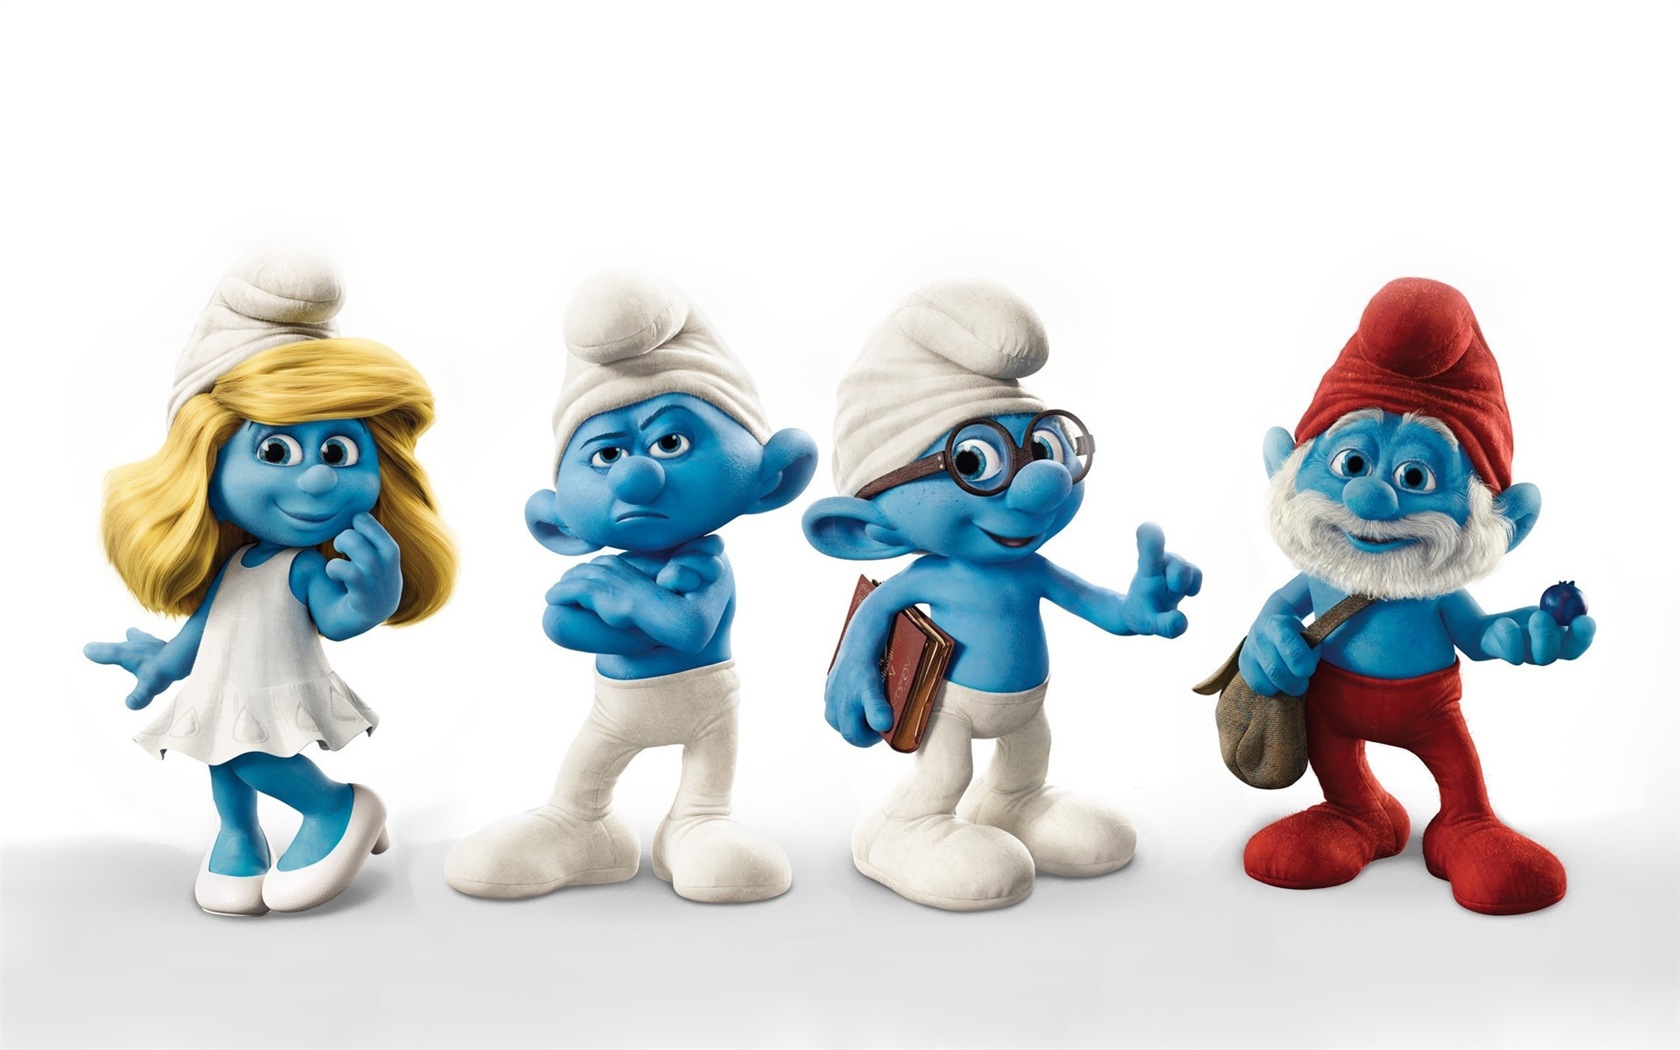 The Smurfs 2 HD movie wallpapers #3 - 1680x1050